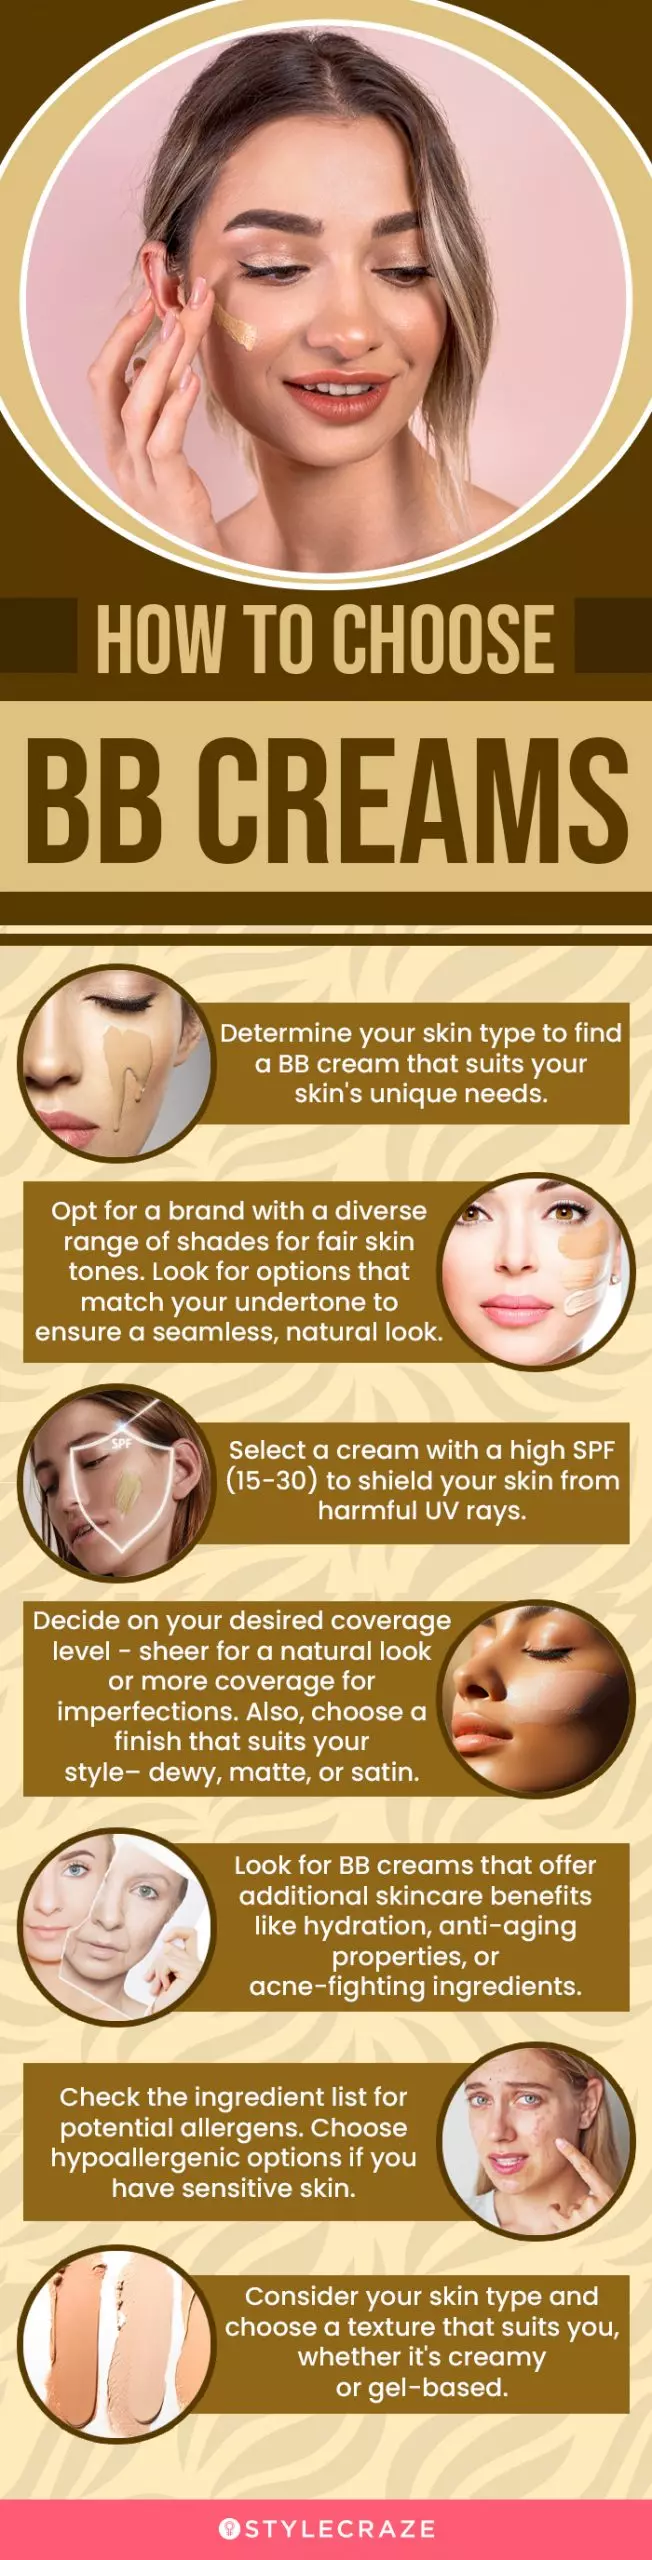 How To Choose BB Creams (infographic)